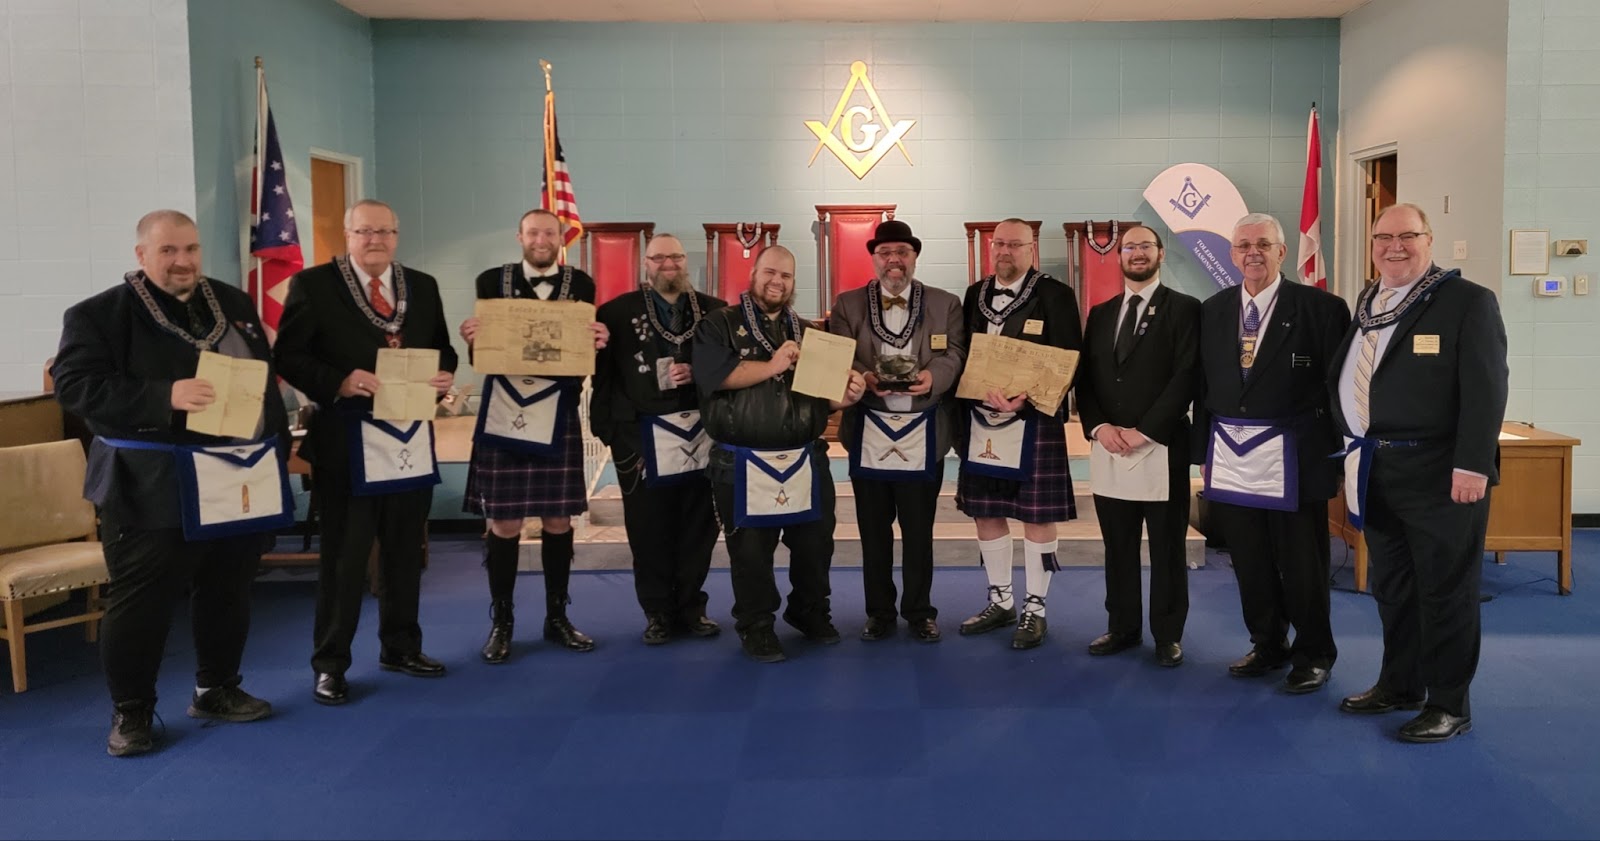 Image of Masons standing in masonic garb holding up old newspapers from Toledo, Ohio.